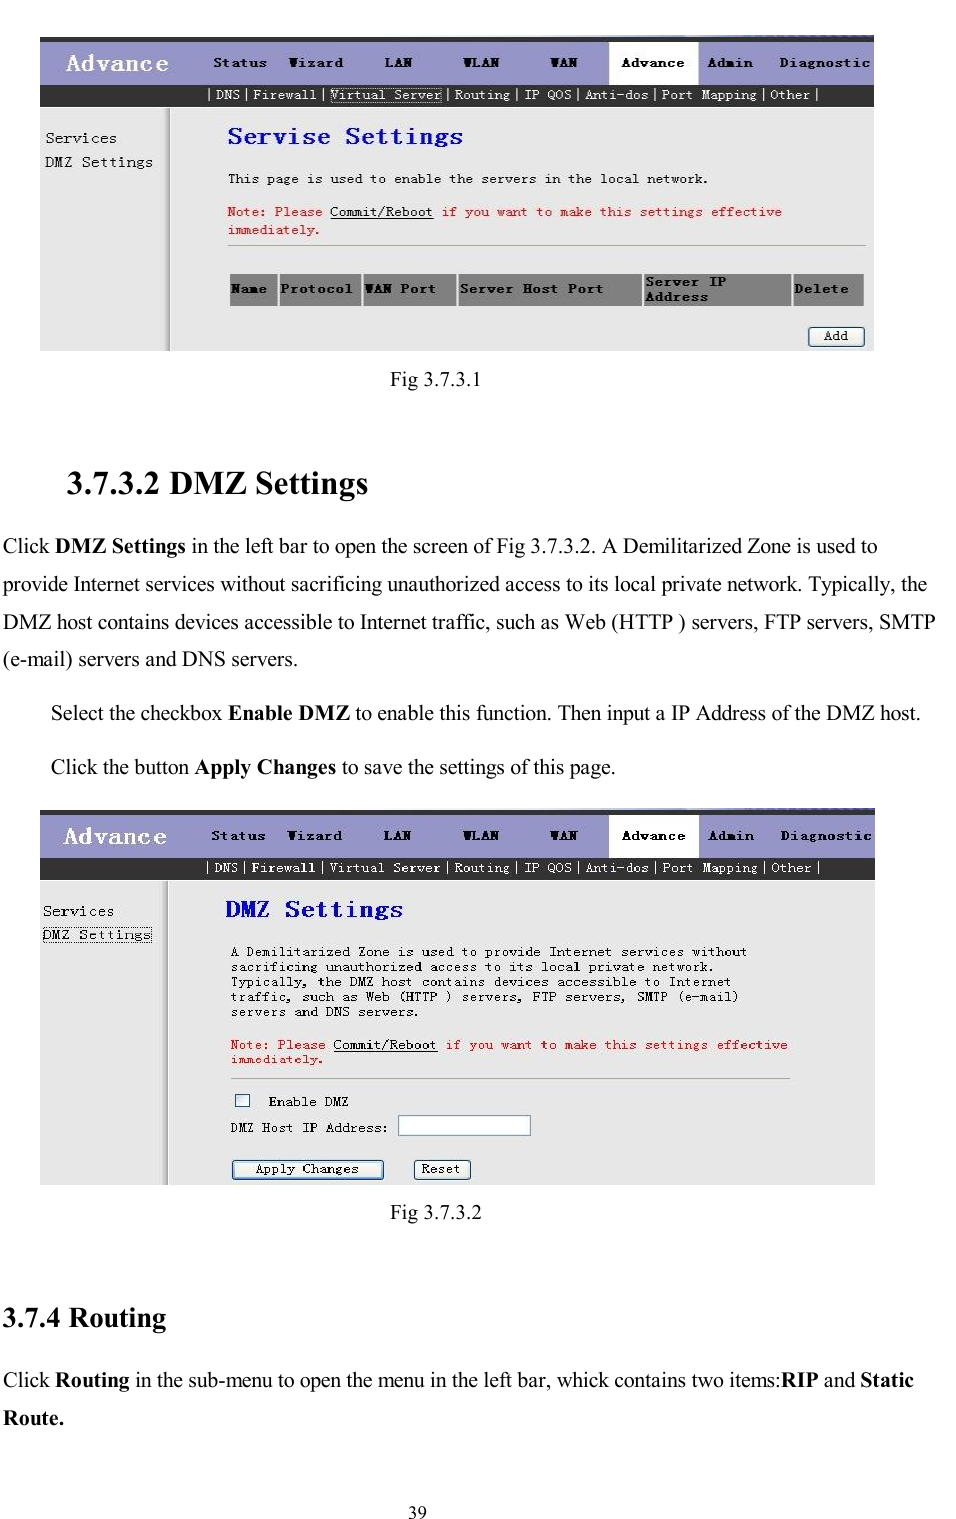                                                                     39  Fig 3.7.3.1   3.7.3.2 DMZ Settings Click DMZ Settings in the left bar to open the screen of Fig 3.7.3.2. A Demilitarized Zone is used to provide Internet services without sacrificing unauthorized access to its local private network. Typically, the DMZ host contains devices accessible to Internet traffic, such as Web (HTTP ) servers, FTP servers, SMTP (e-mail) servers and DNS servers. Select the checkbox Enable DMZ to enable this function. Then input a IP Address of the DMZ host. Click the button Apply Changes to save the settings of this page.  Fig 3.7.3.2  3.7.4 Routing Click Routing in the sub-menu to open the menu in the left bar, whick contains two items:RIP and Static Route.   